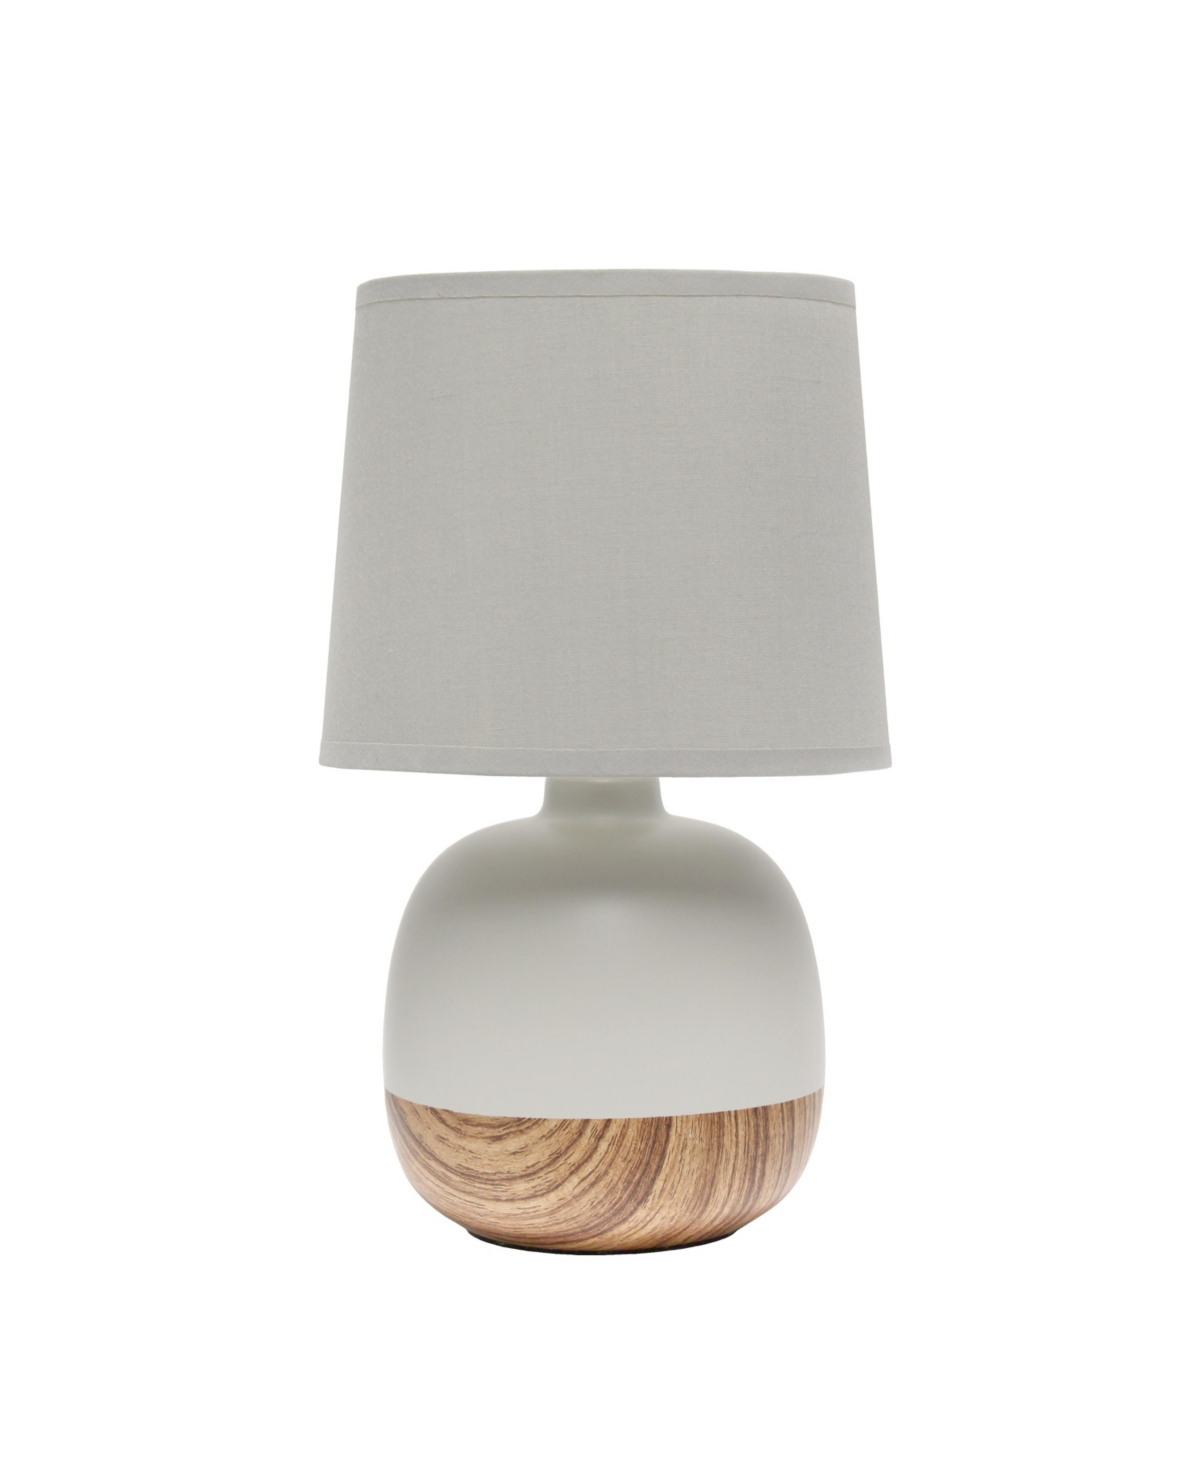 Simple Designs Petite Mid Century Table Lamp In Light Wood With Light Gray